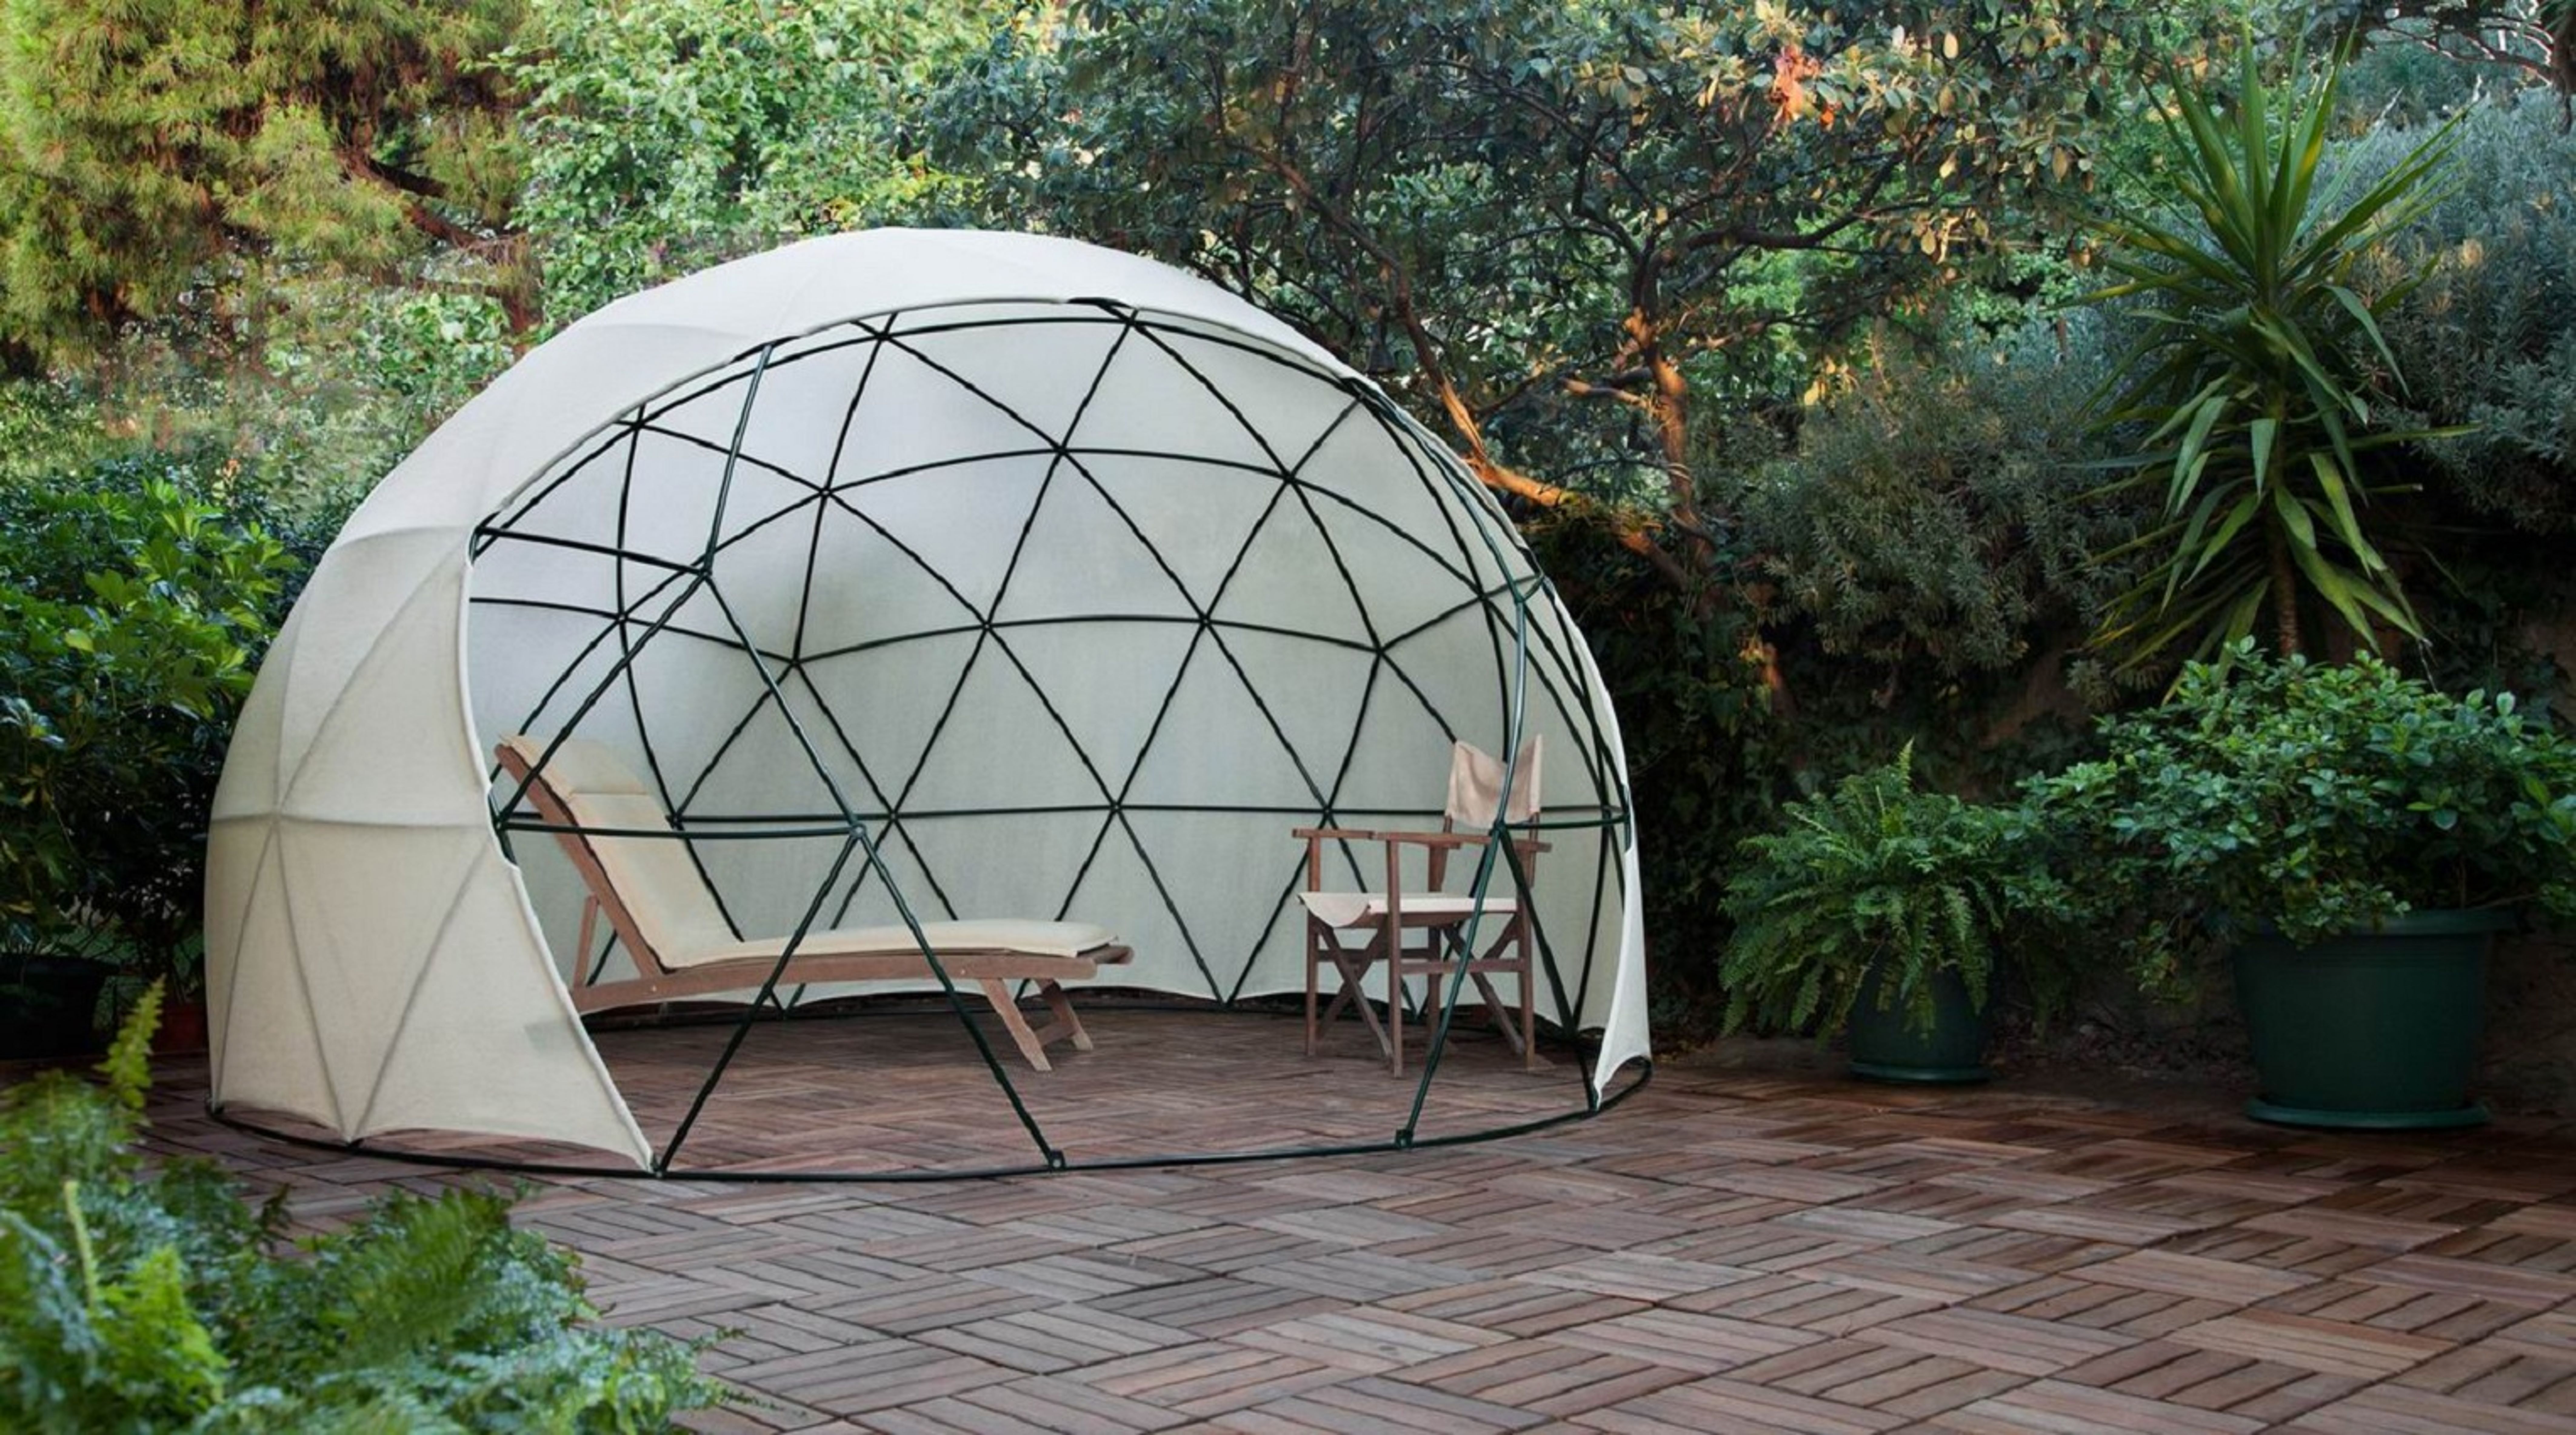 Luxury Hotel Resort Glamping Clear Garden Igloo Dome Tents 12Ft For Sale 